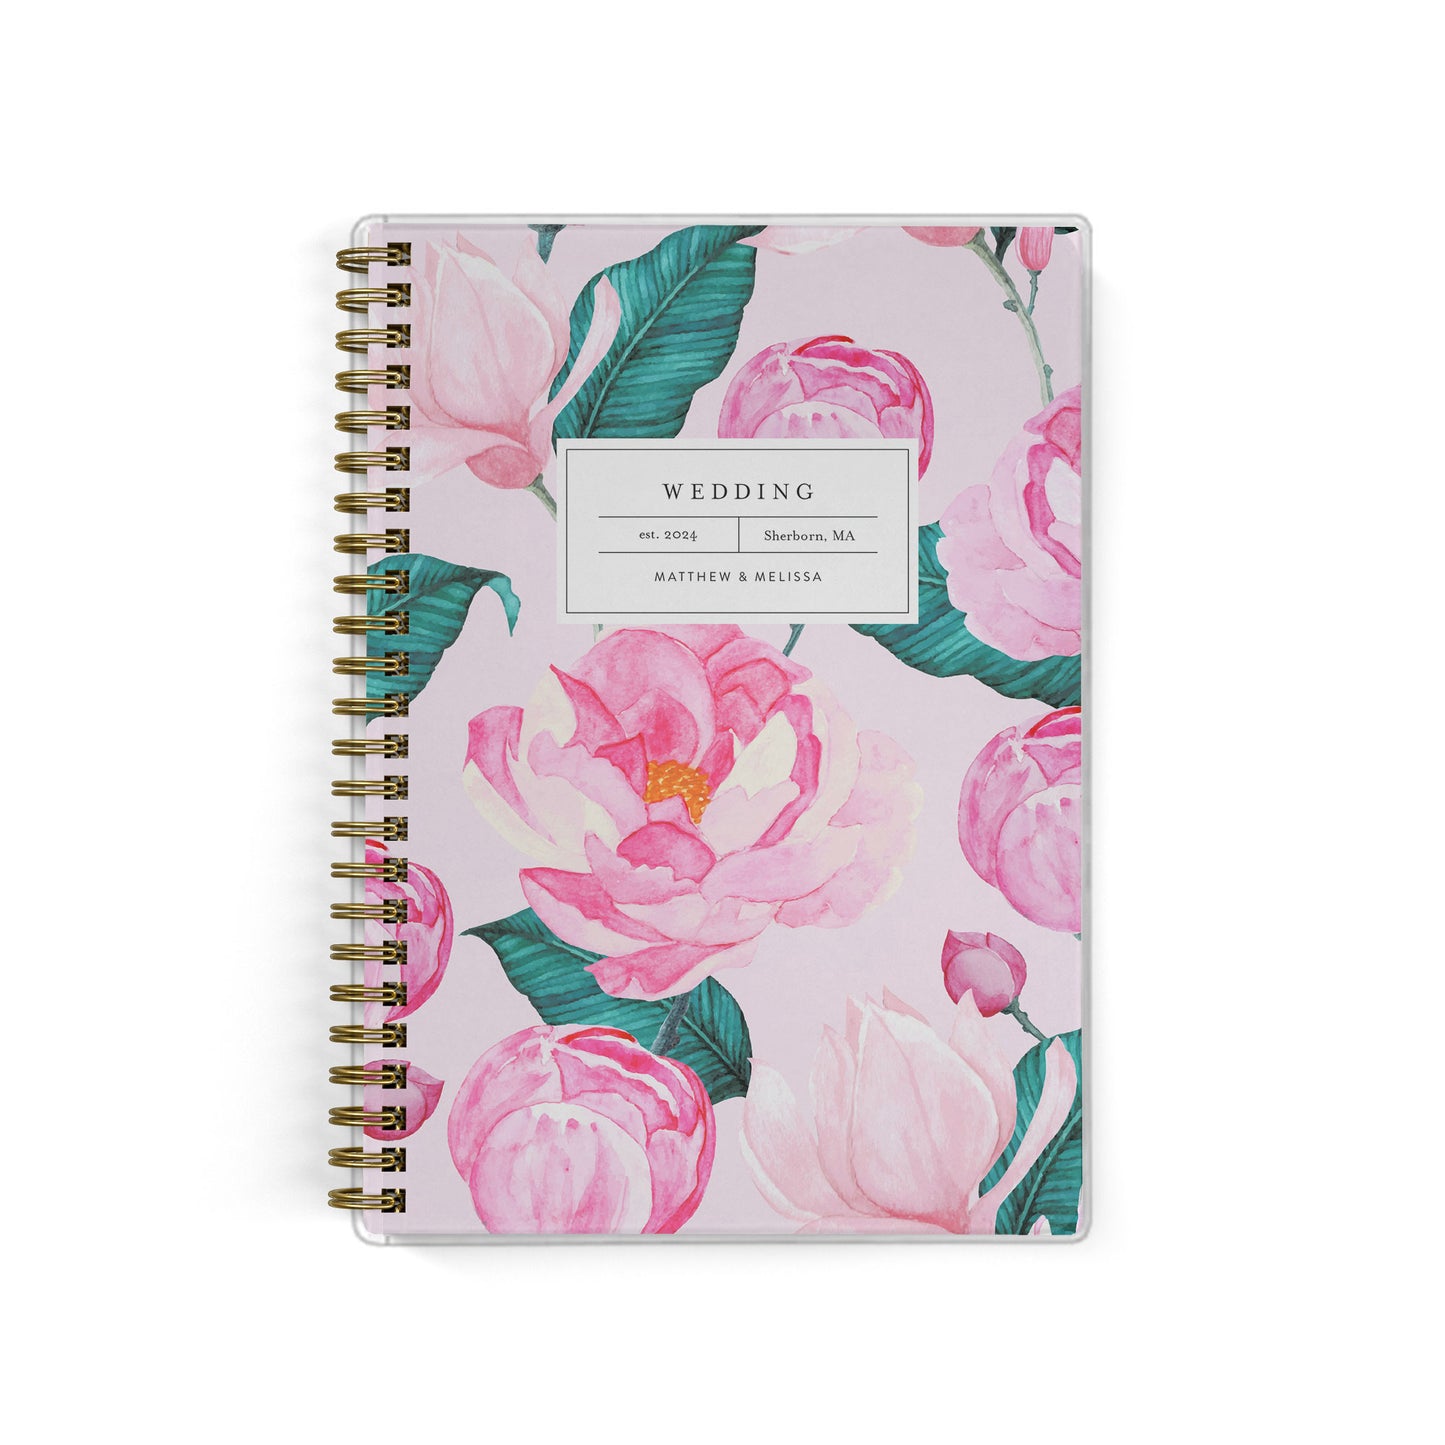 Our exclusive mini wedding planners are perfect for planning small weddings and elopements, shown in a preppy pink peony print